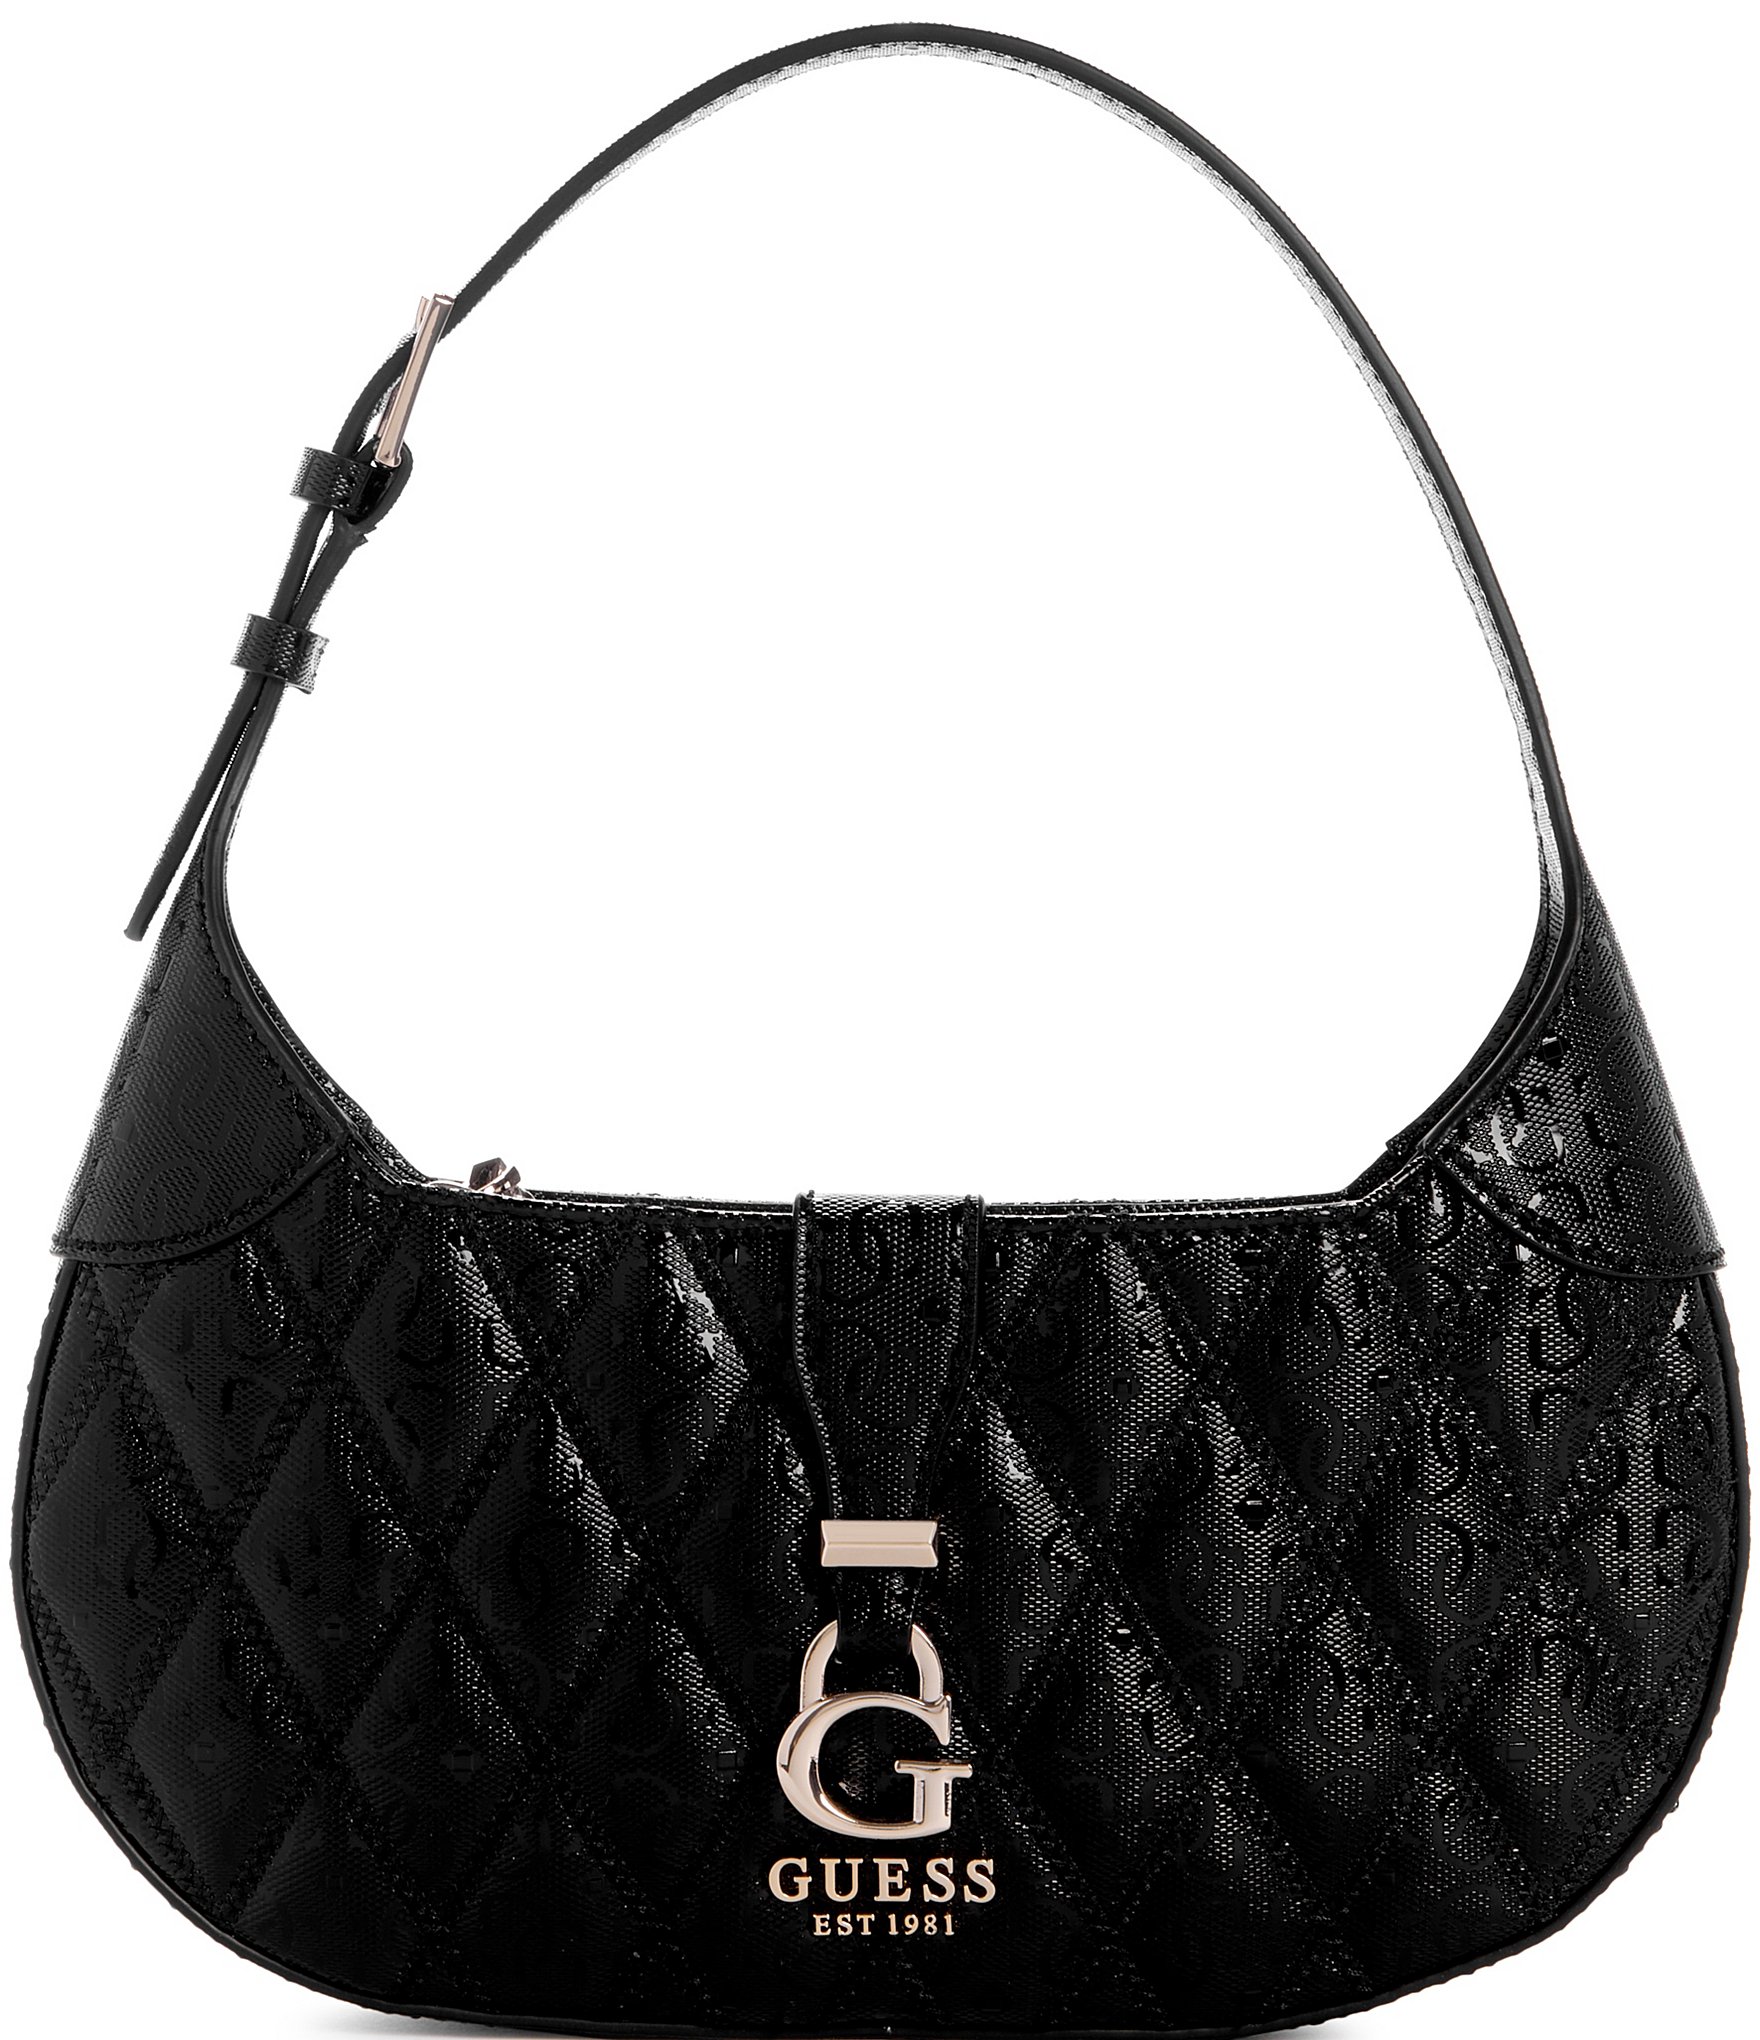 Guess purse with removable chain | Guess purses, Purses, Chain